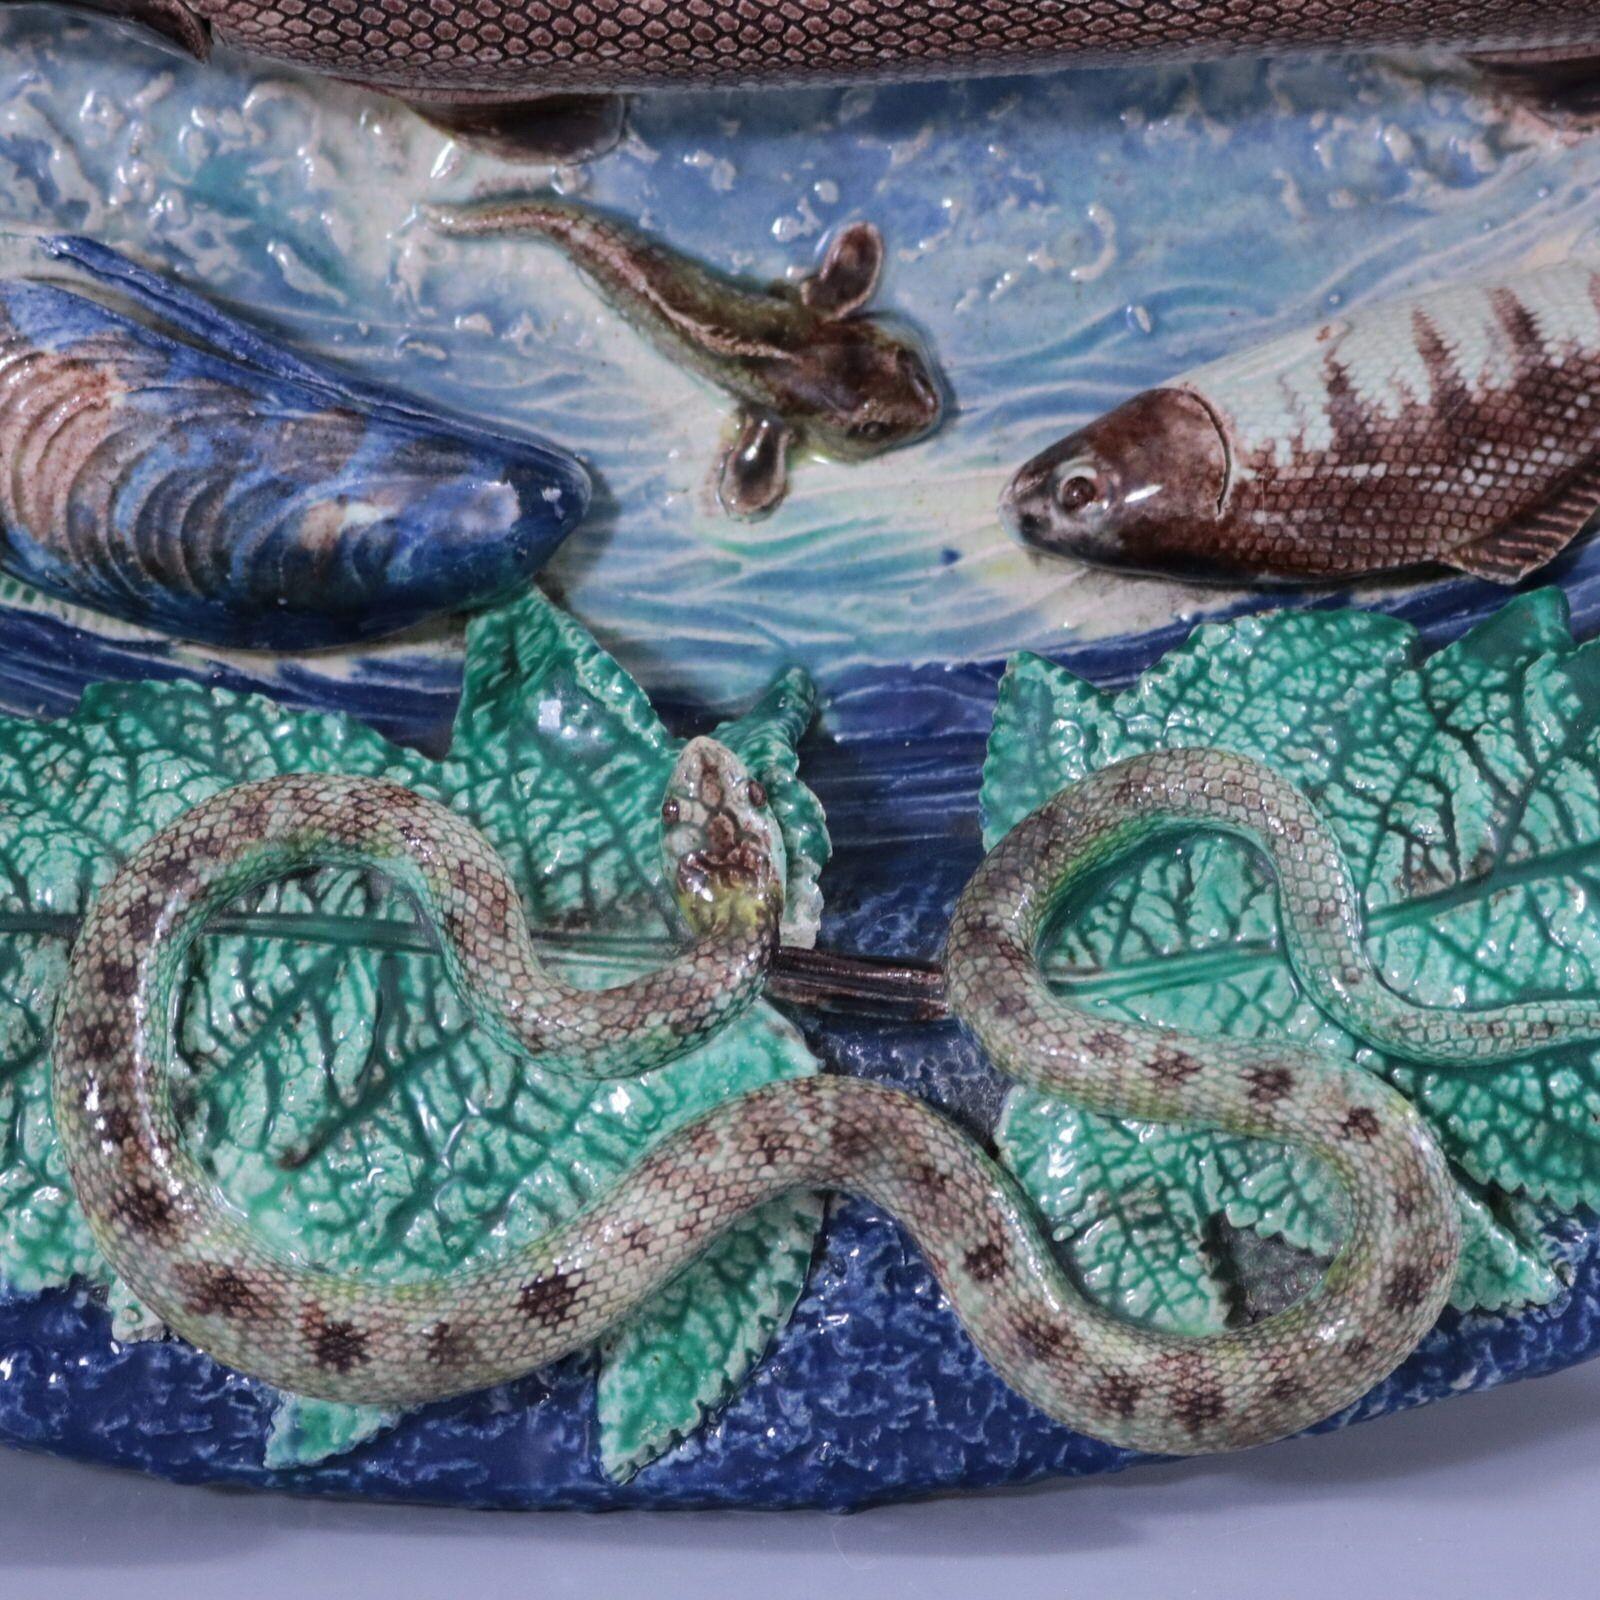 Barbizet (attributed) French Palissy Majolica wall platter which features fish (including a pike), a snake, a lizard, a frog, insects, shellfish and leaves. Colouration: blue, green, brown, are predominant.